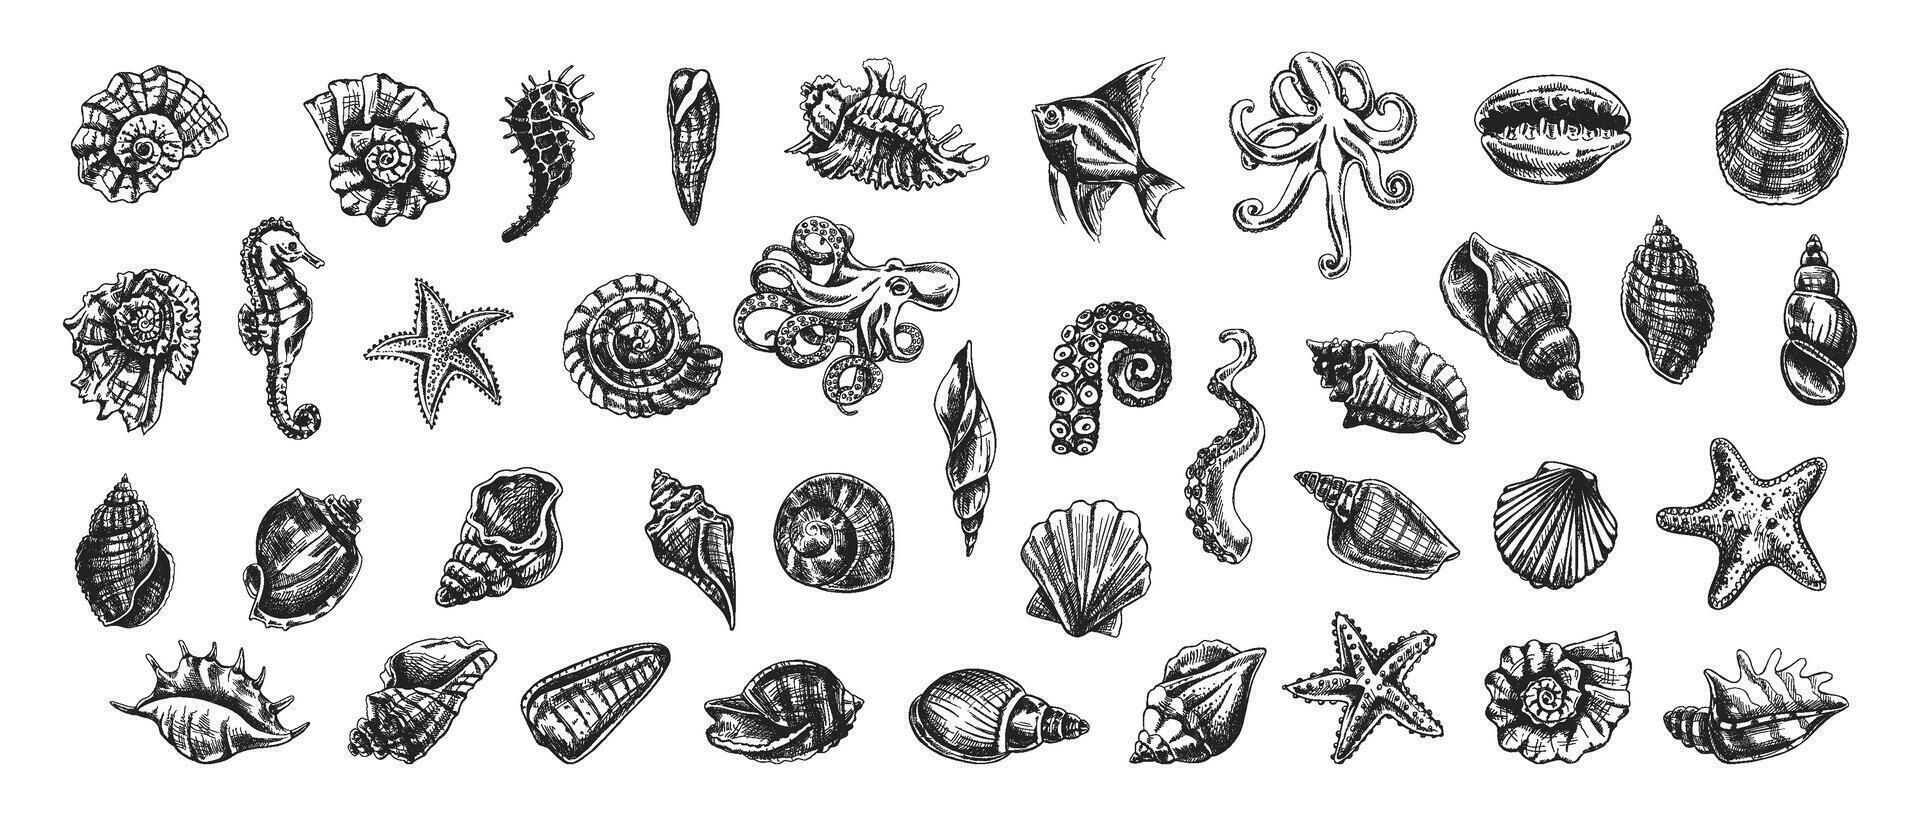 Seashells, octopus, fish, starfish, seahorses, ammonite vector set. Hand drawn sketch illustration. Collection of realistic sketches of various ocean creatures isolated on white background.